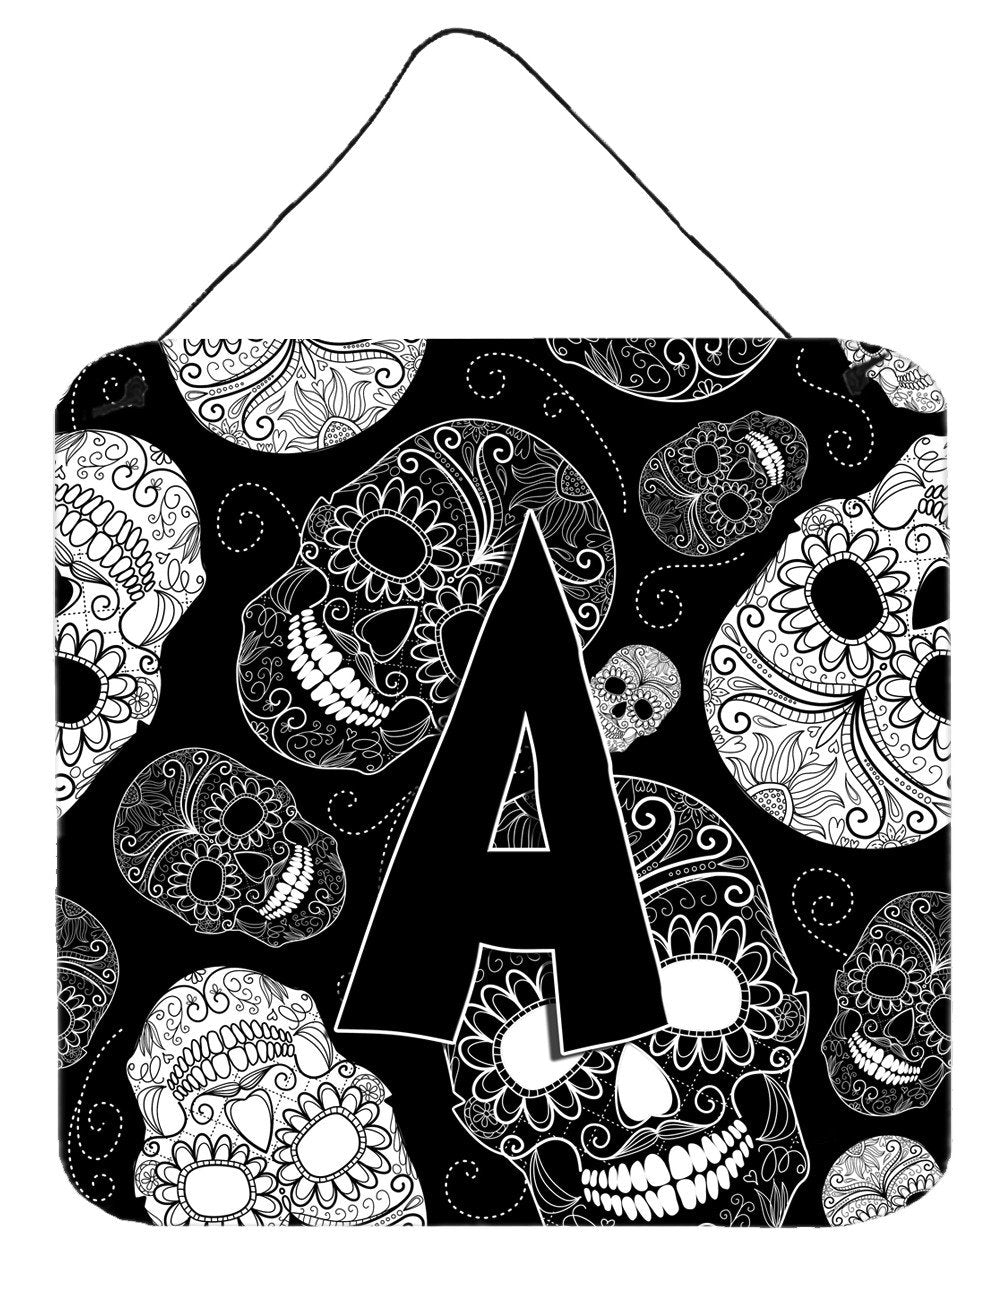 Letter A Day of the Dead Skulls Black Wall or Door Hanging Prints CJ2008-ADS66 by Caroline's Treasures